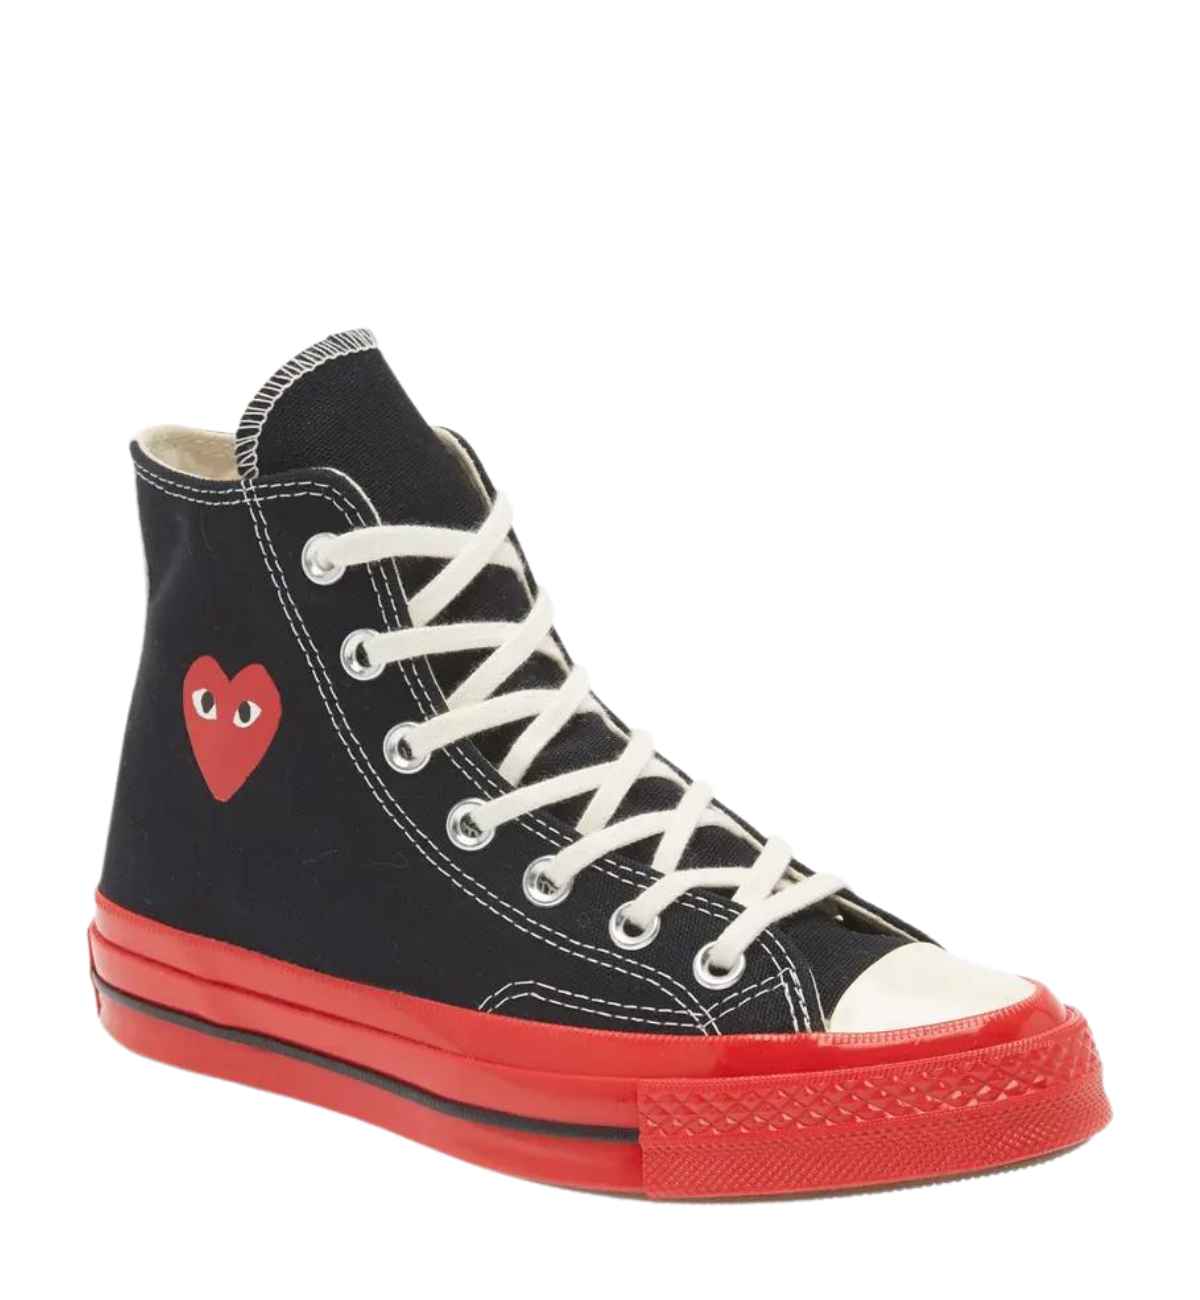 Black heart sneaker with red heart embroidery on the side with white laces on white background.